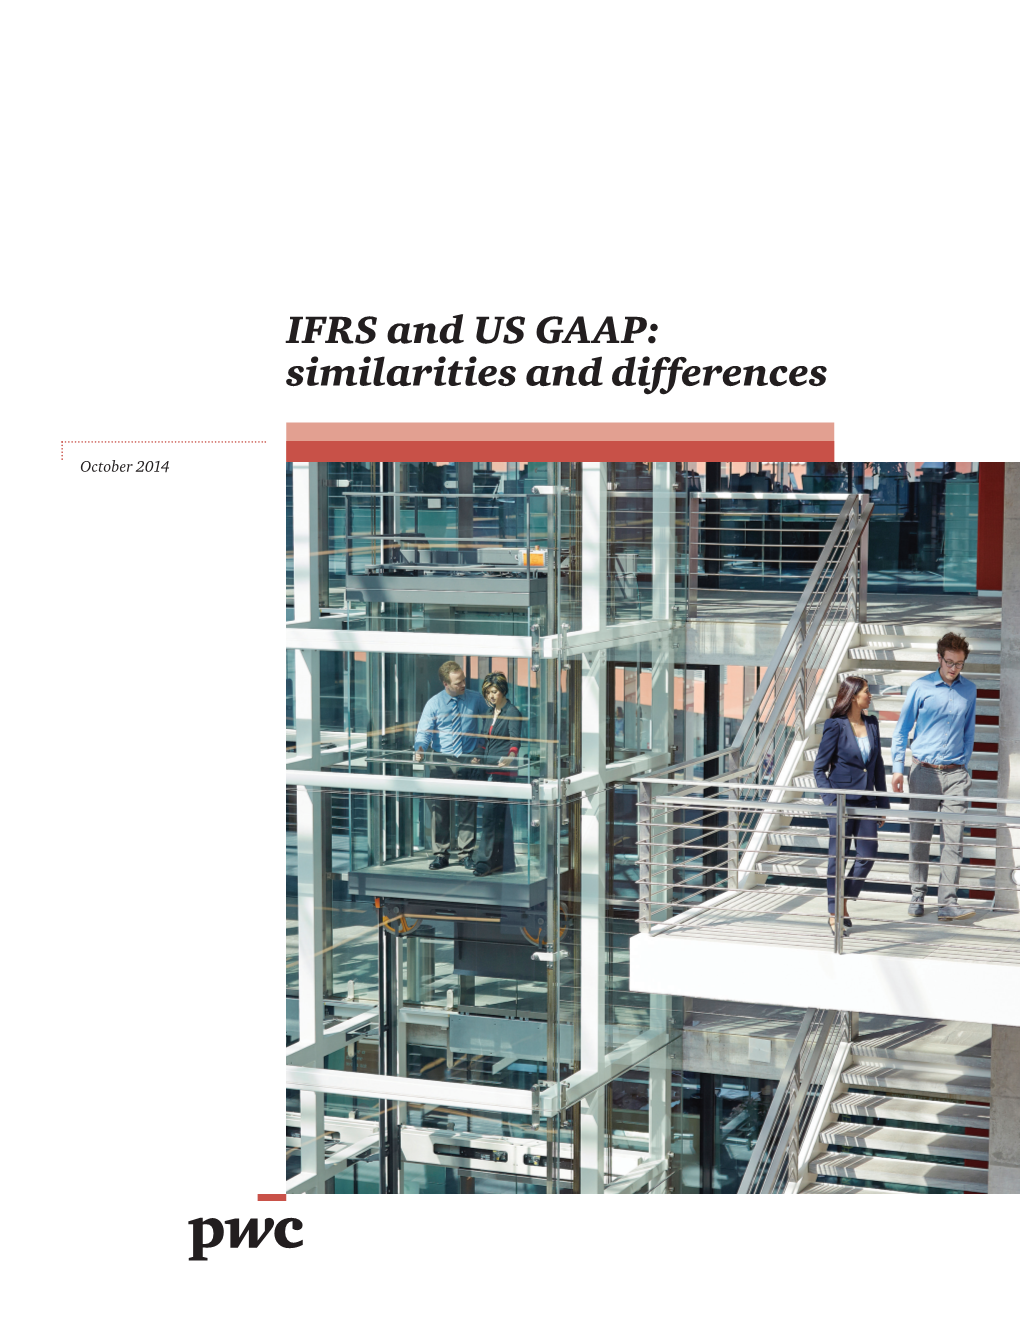 IFRS and US GAAP: Similarities and Differences